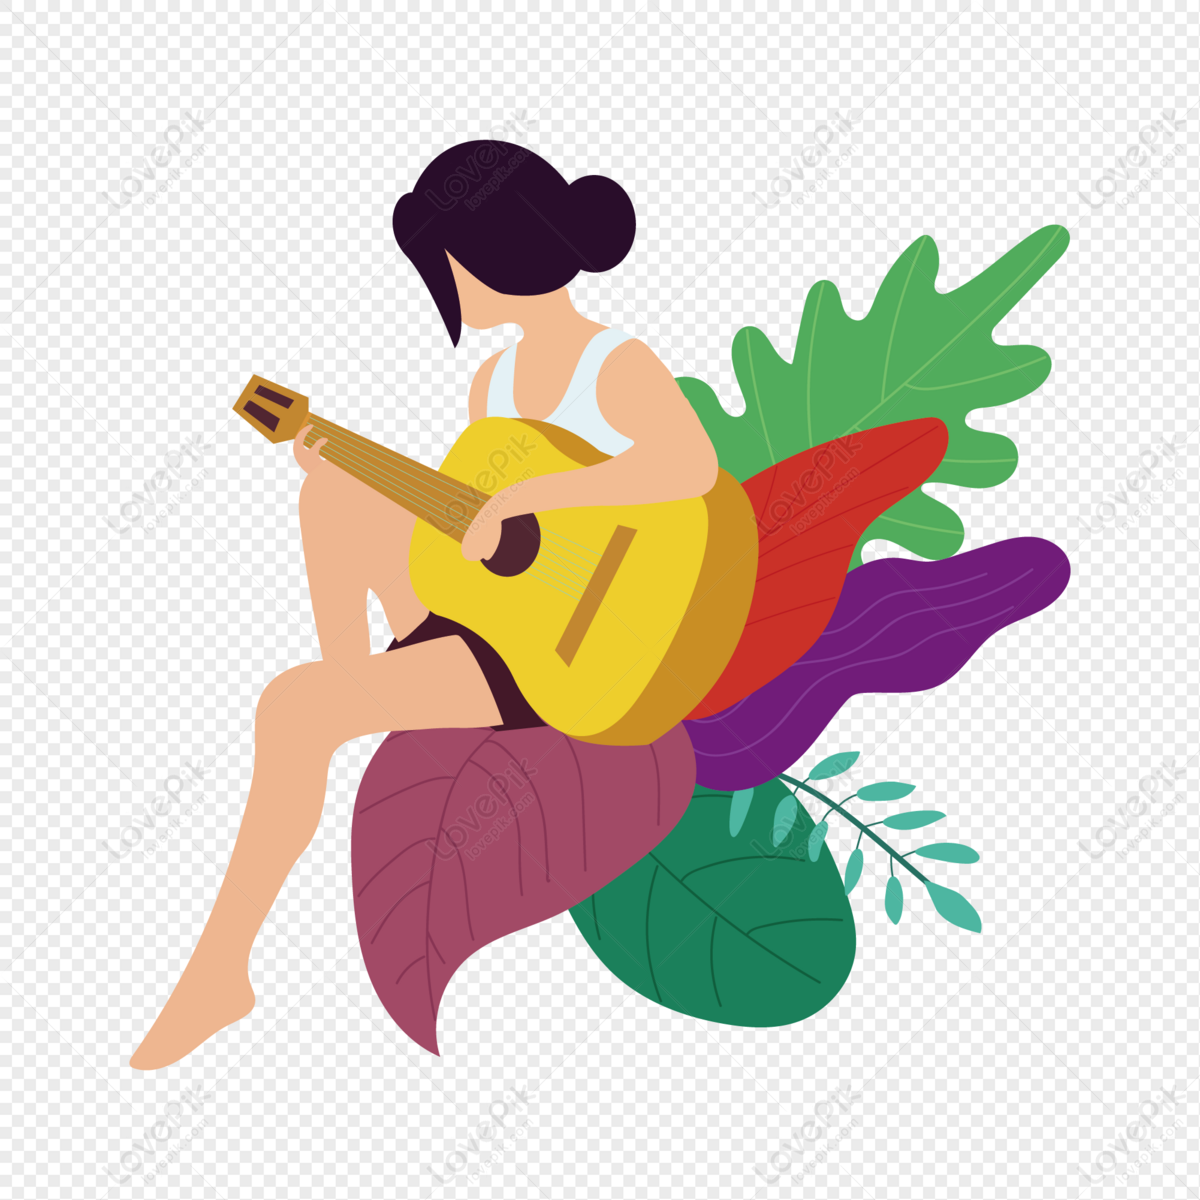 Guitar Outline Vector Art, Icons, and Graphics for Free Download